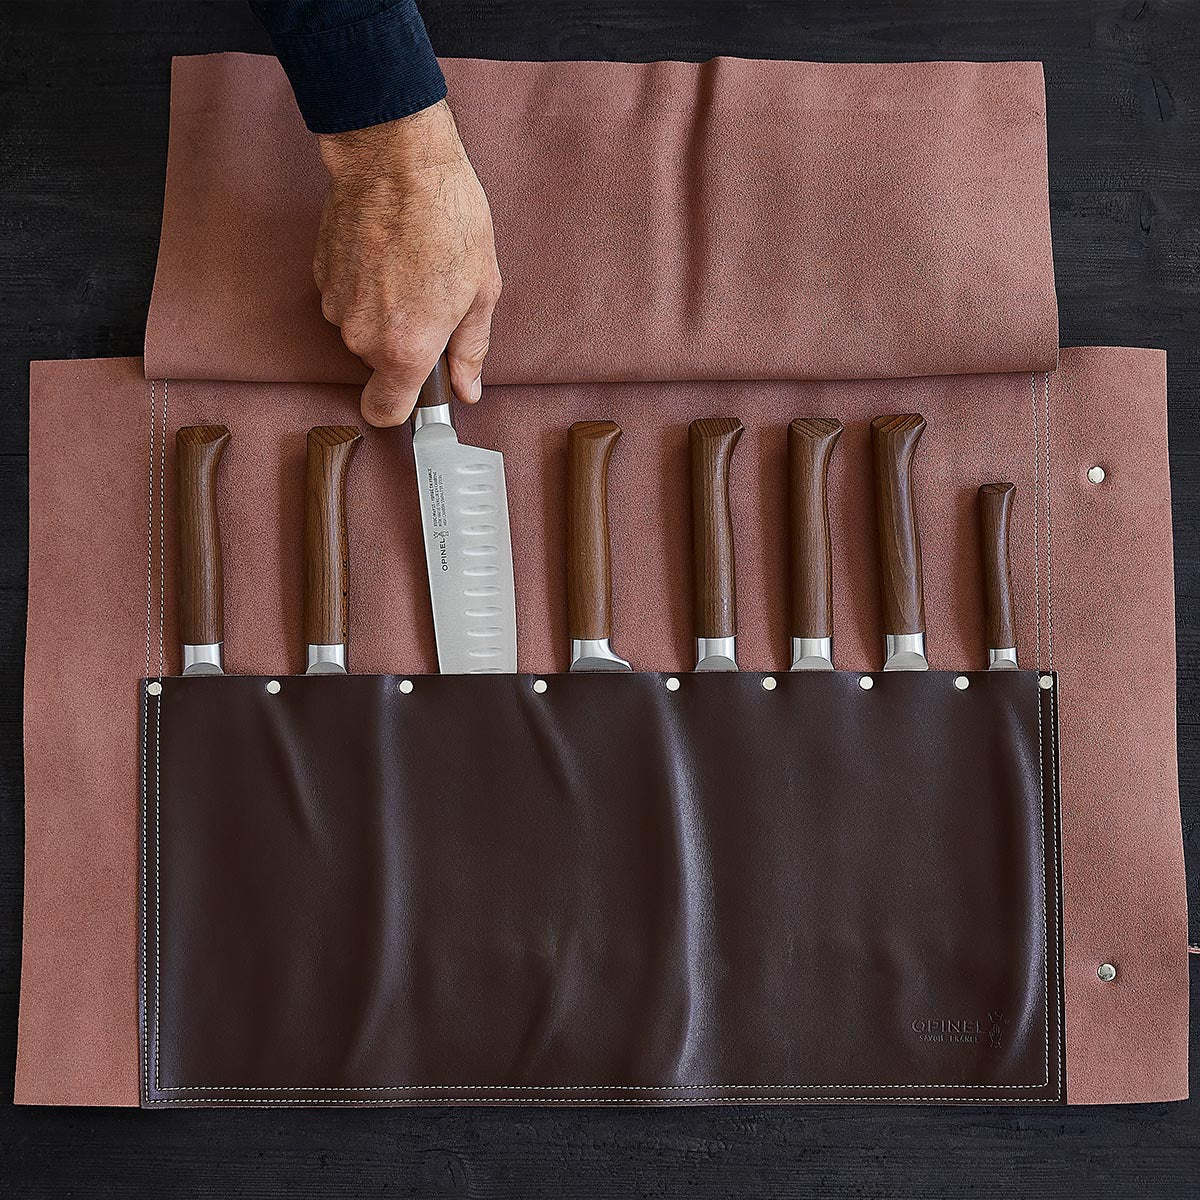 Leather Paring Knives